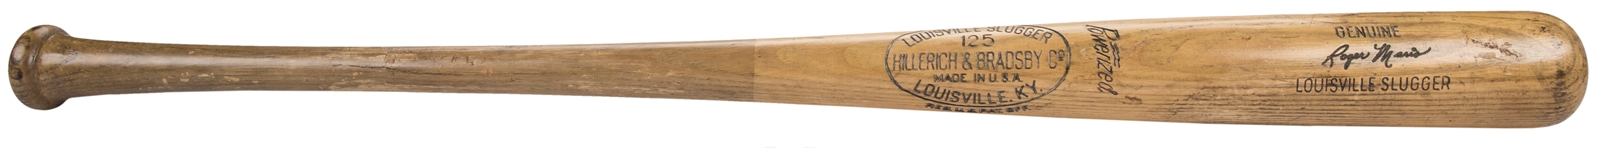 1961 Roger Maris Game Used Hillerich & Bradsby O16 Yankees Team Signed Model Bat With 8 Signatures Including Maris! (PSA/DNA GU 9)